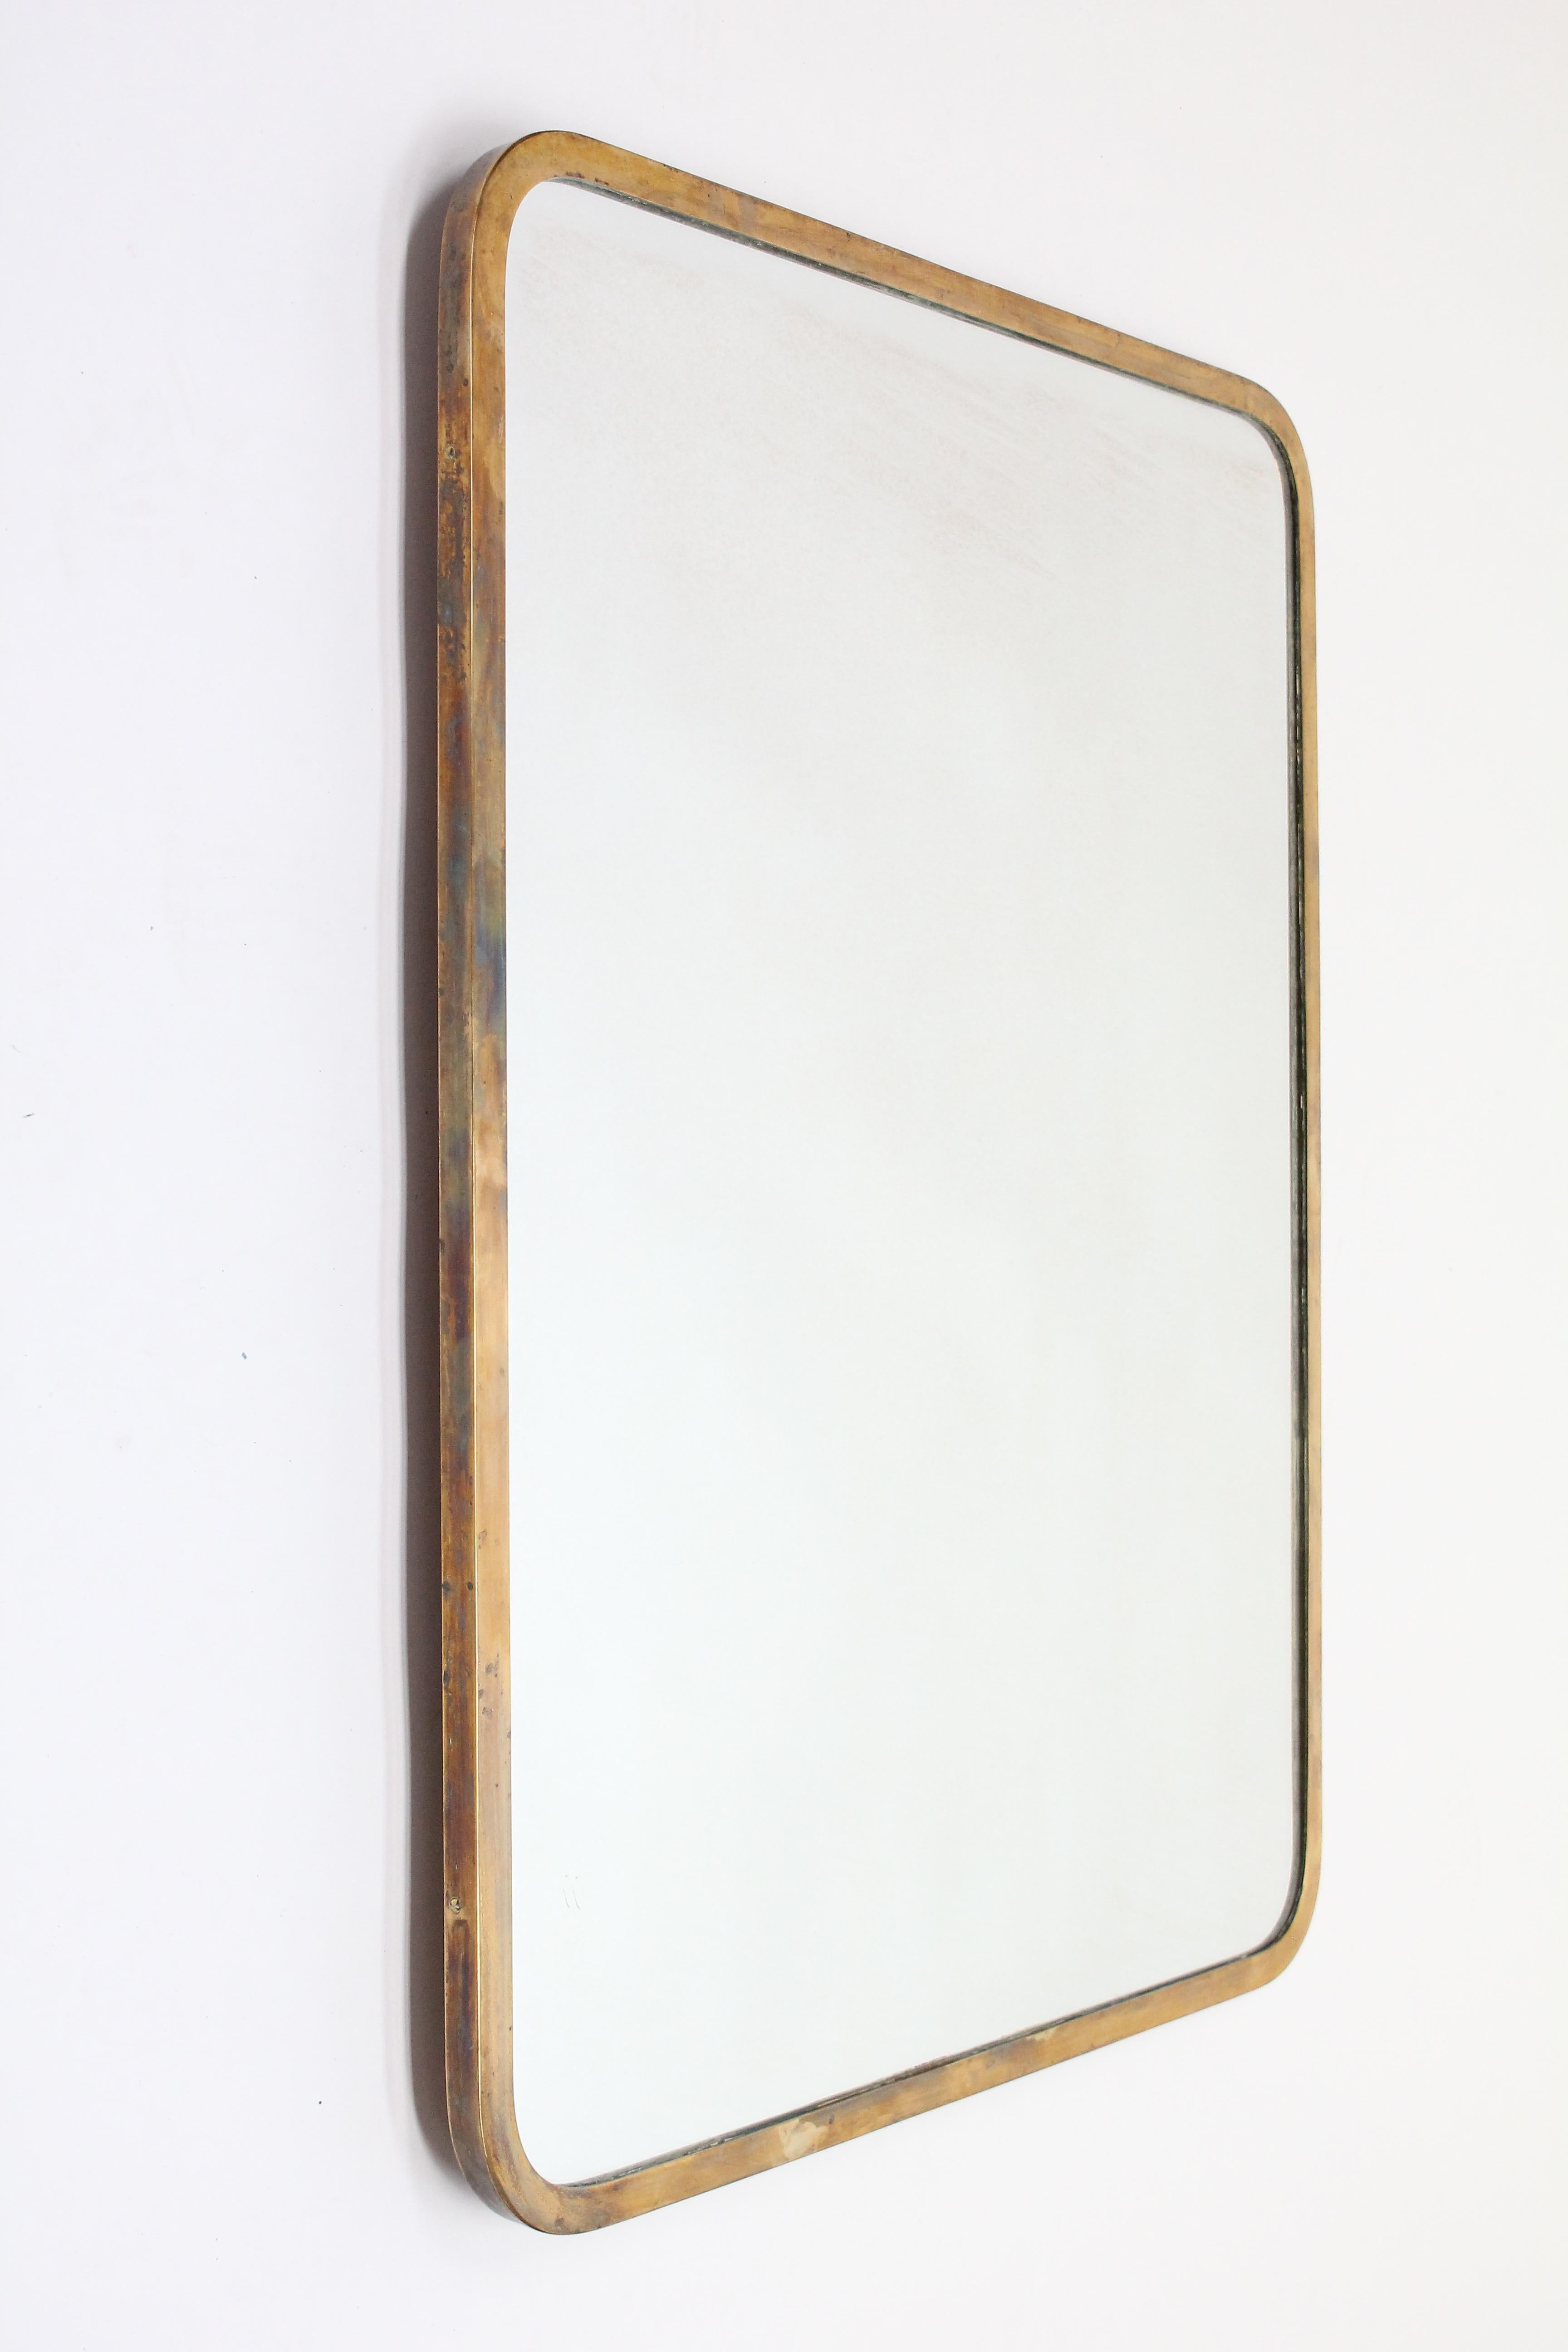 Brass mirror with rounded corners. A very nice example of a 